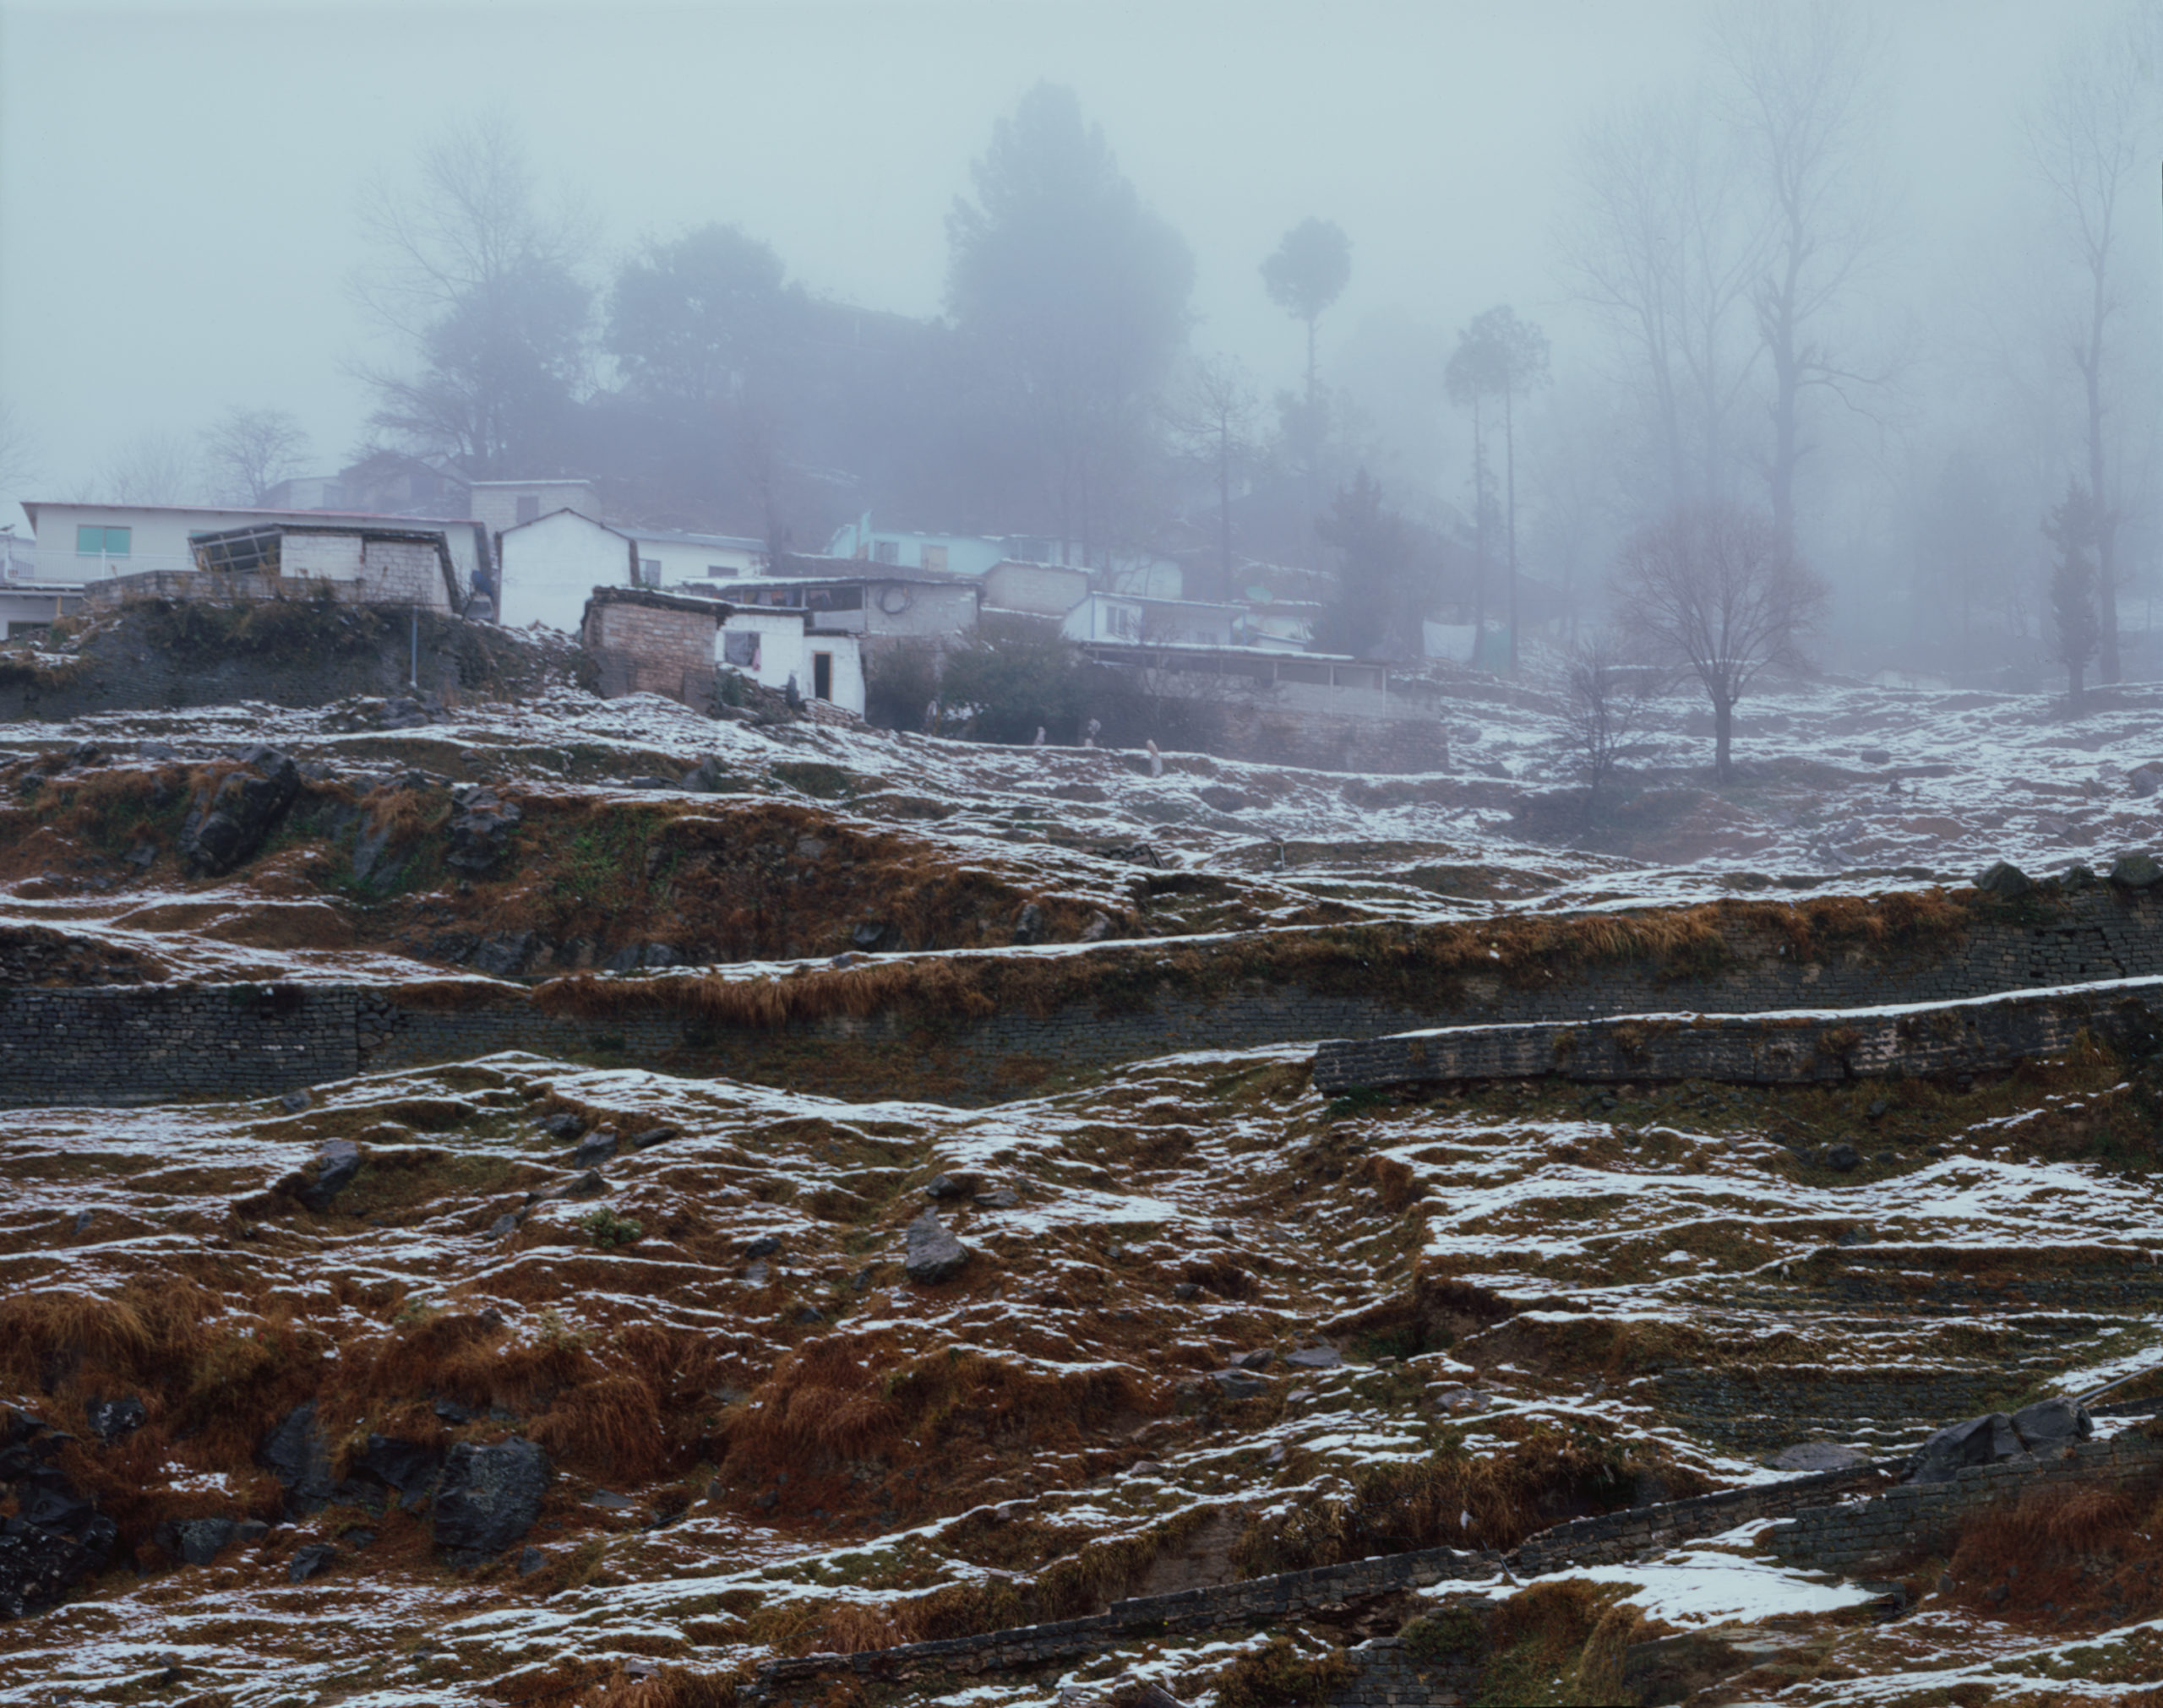 A foggy picture showing houses on a hill